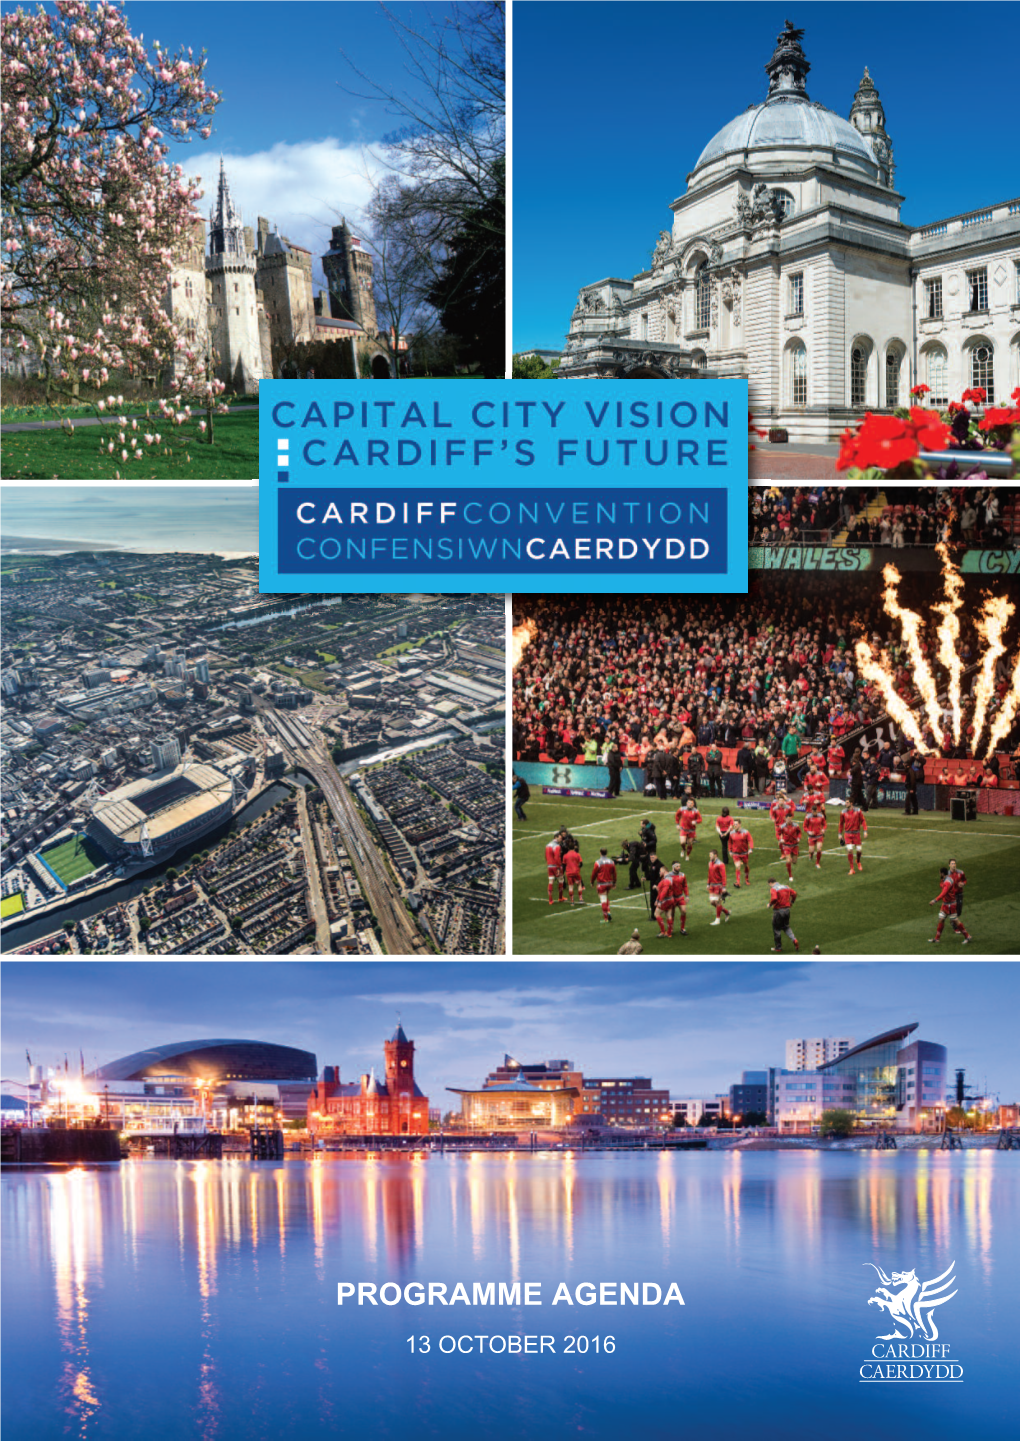 PROGRAMME AGENDA 13 OCTOBER 2016 Welcome to the Cardiff Convention 2016